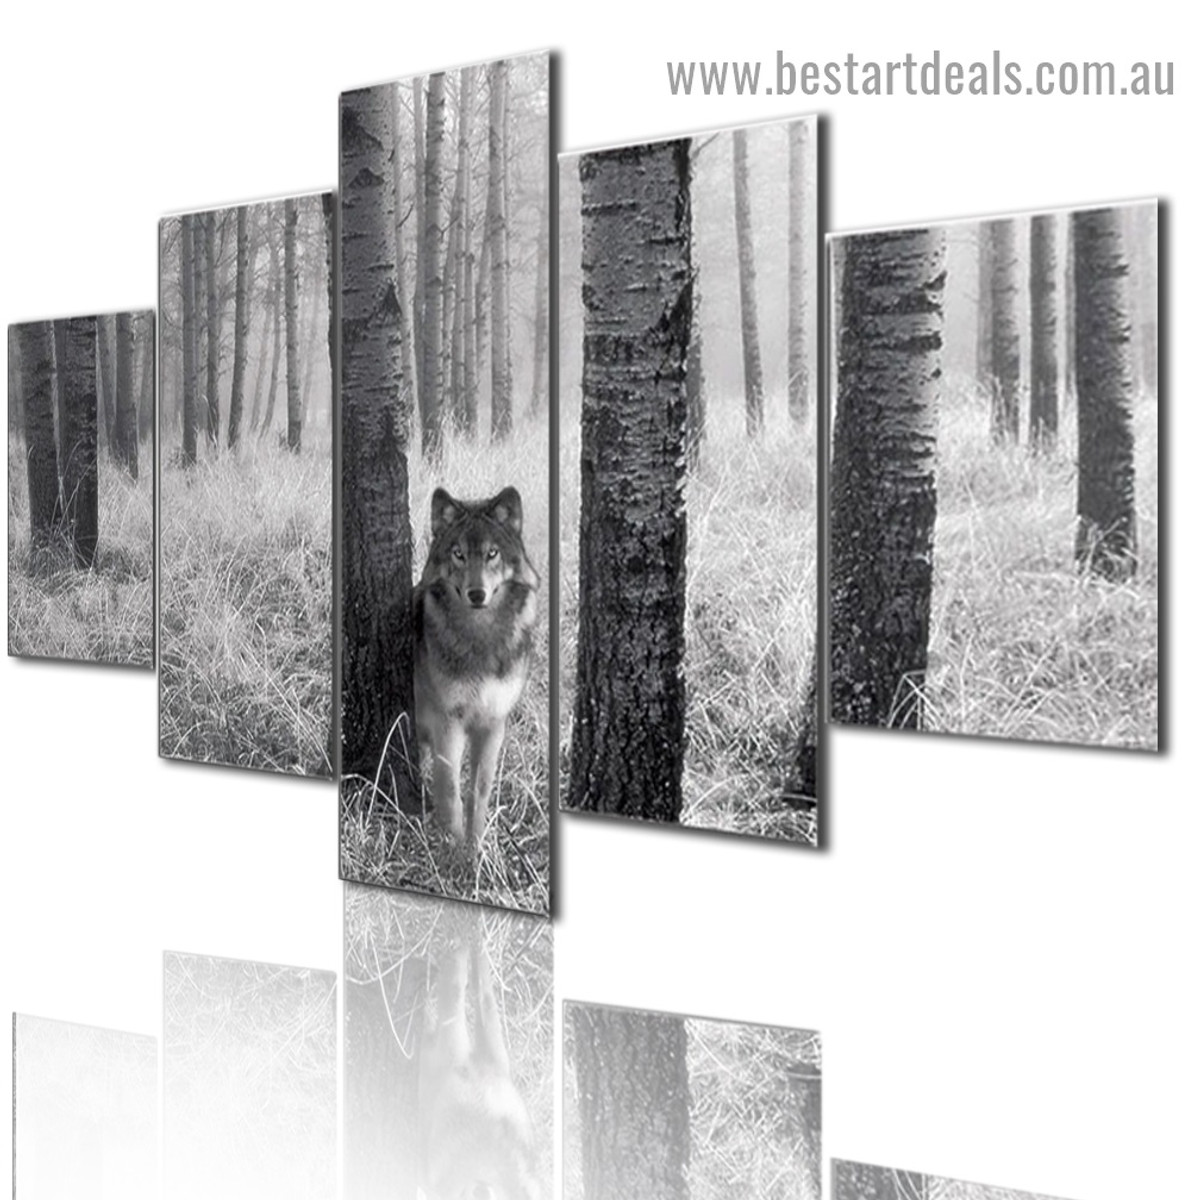 Faded Husky Wolf Animal Landscape Modern Artwork Image Canvas Print for Room Wall Ornament